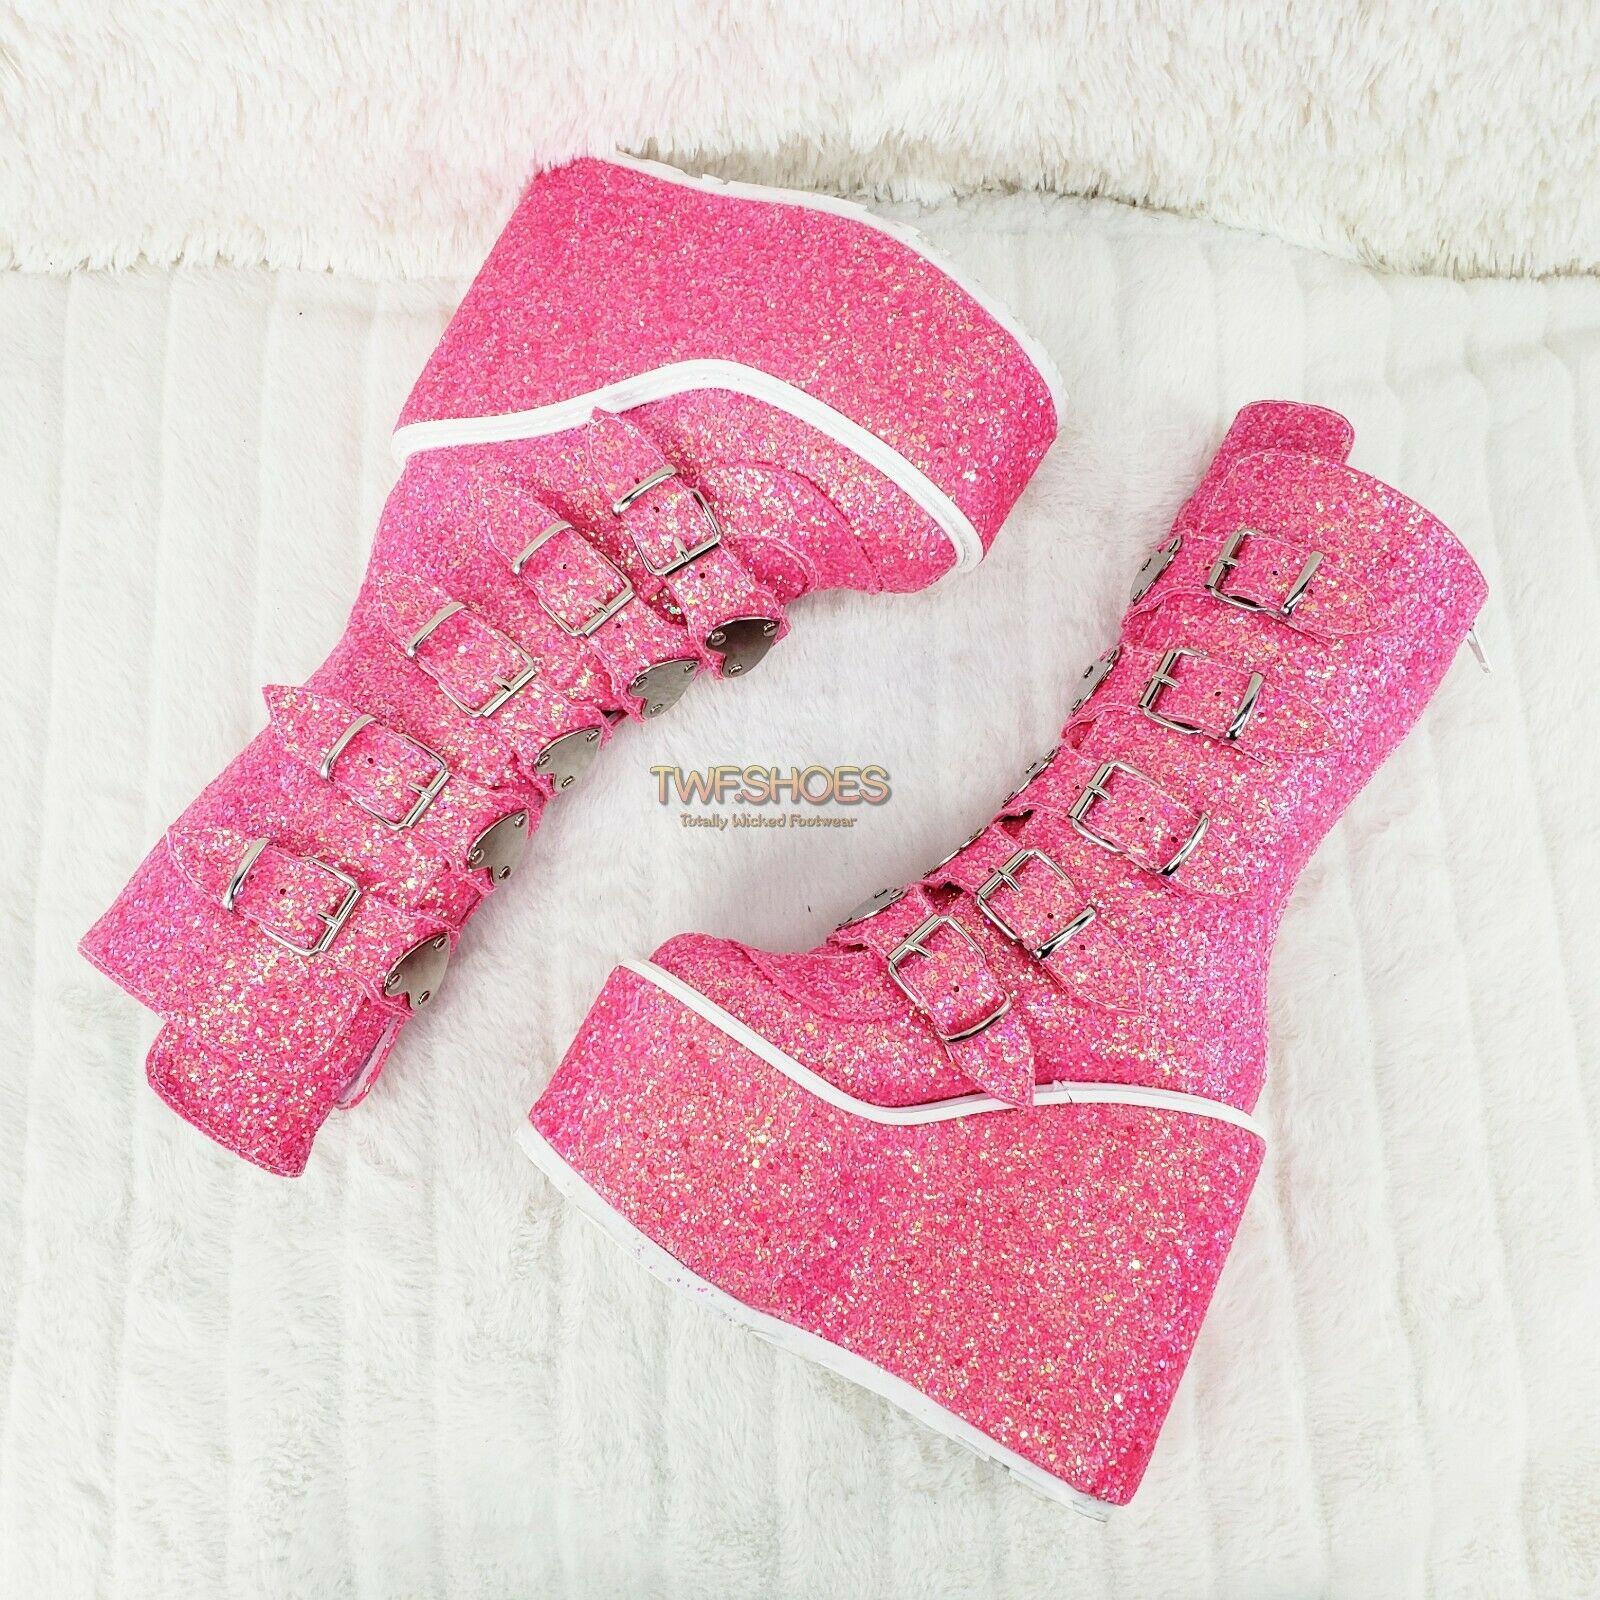 Swing 230G Pink Glitter Boot 5.5 Platform Heart Strap Goth Boots 6 -11 NY